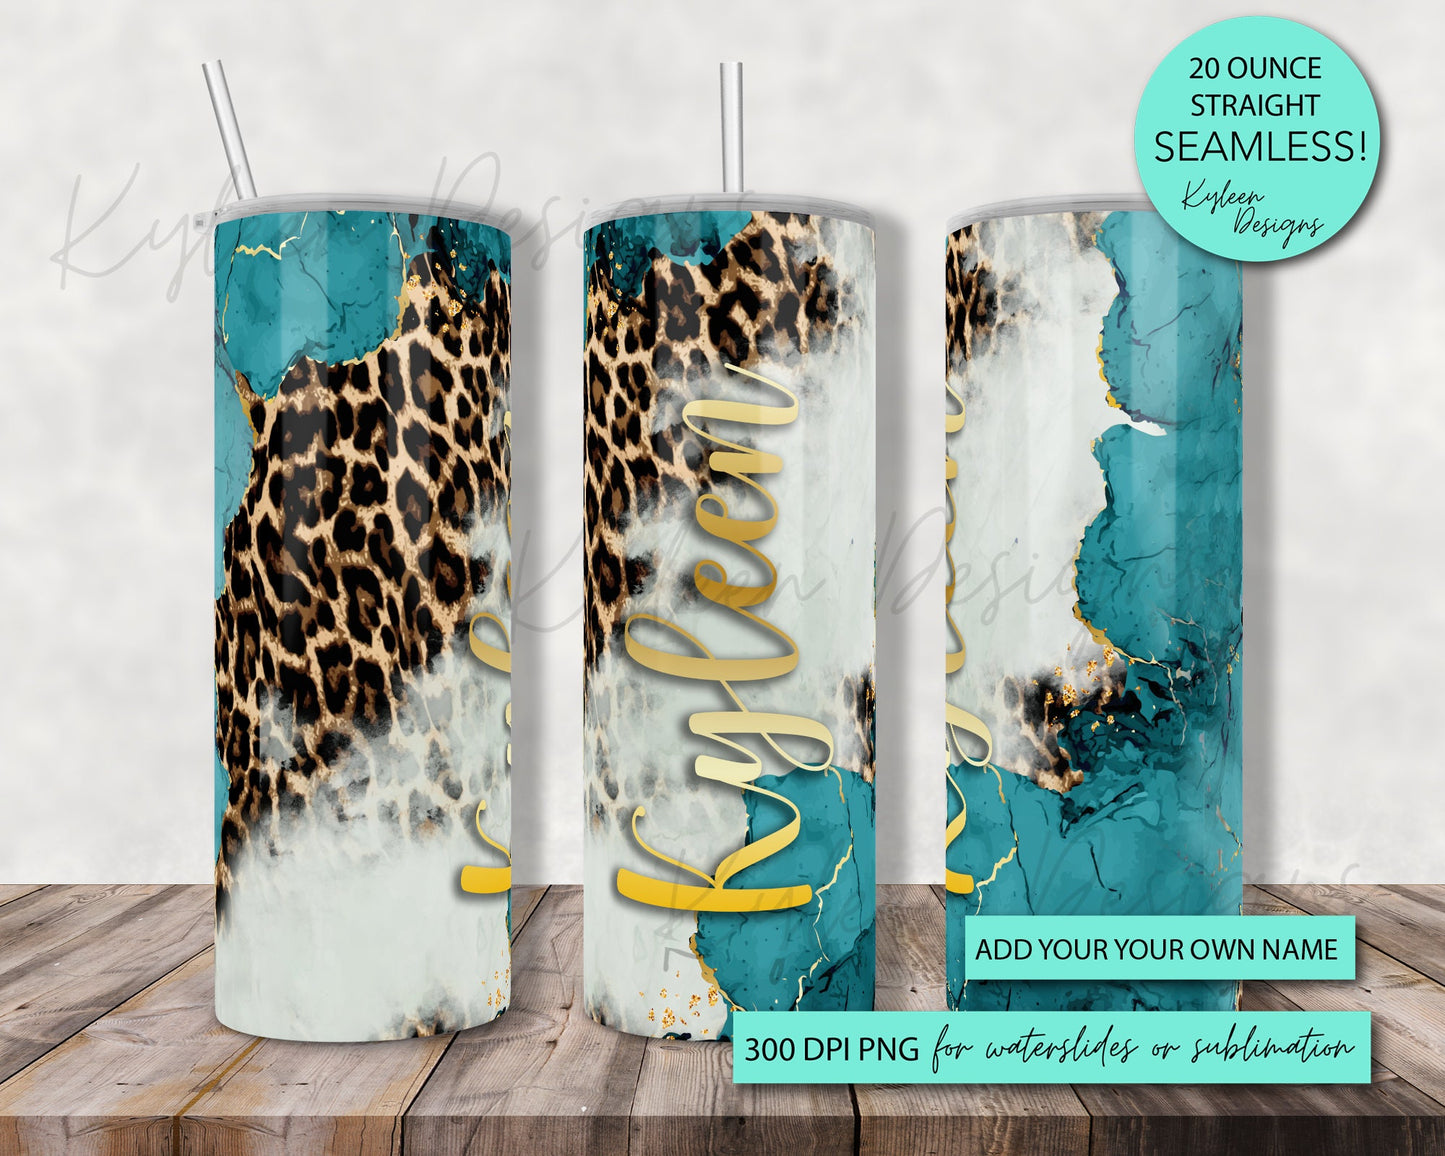 Add your own name SEAMLESS 20 ounce straight marble leopard wrap for sublimation, waterslide High res PNG digital file- Straight only